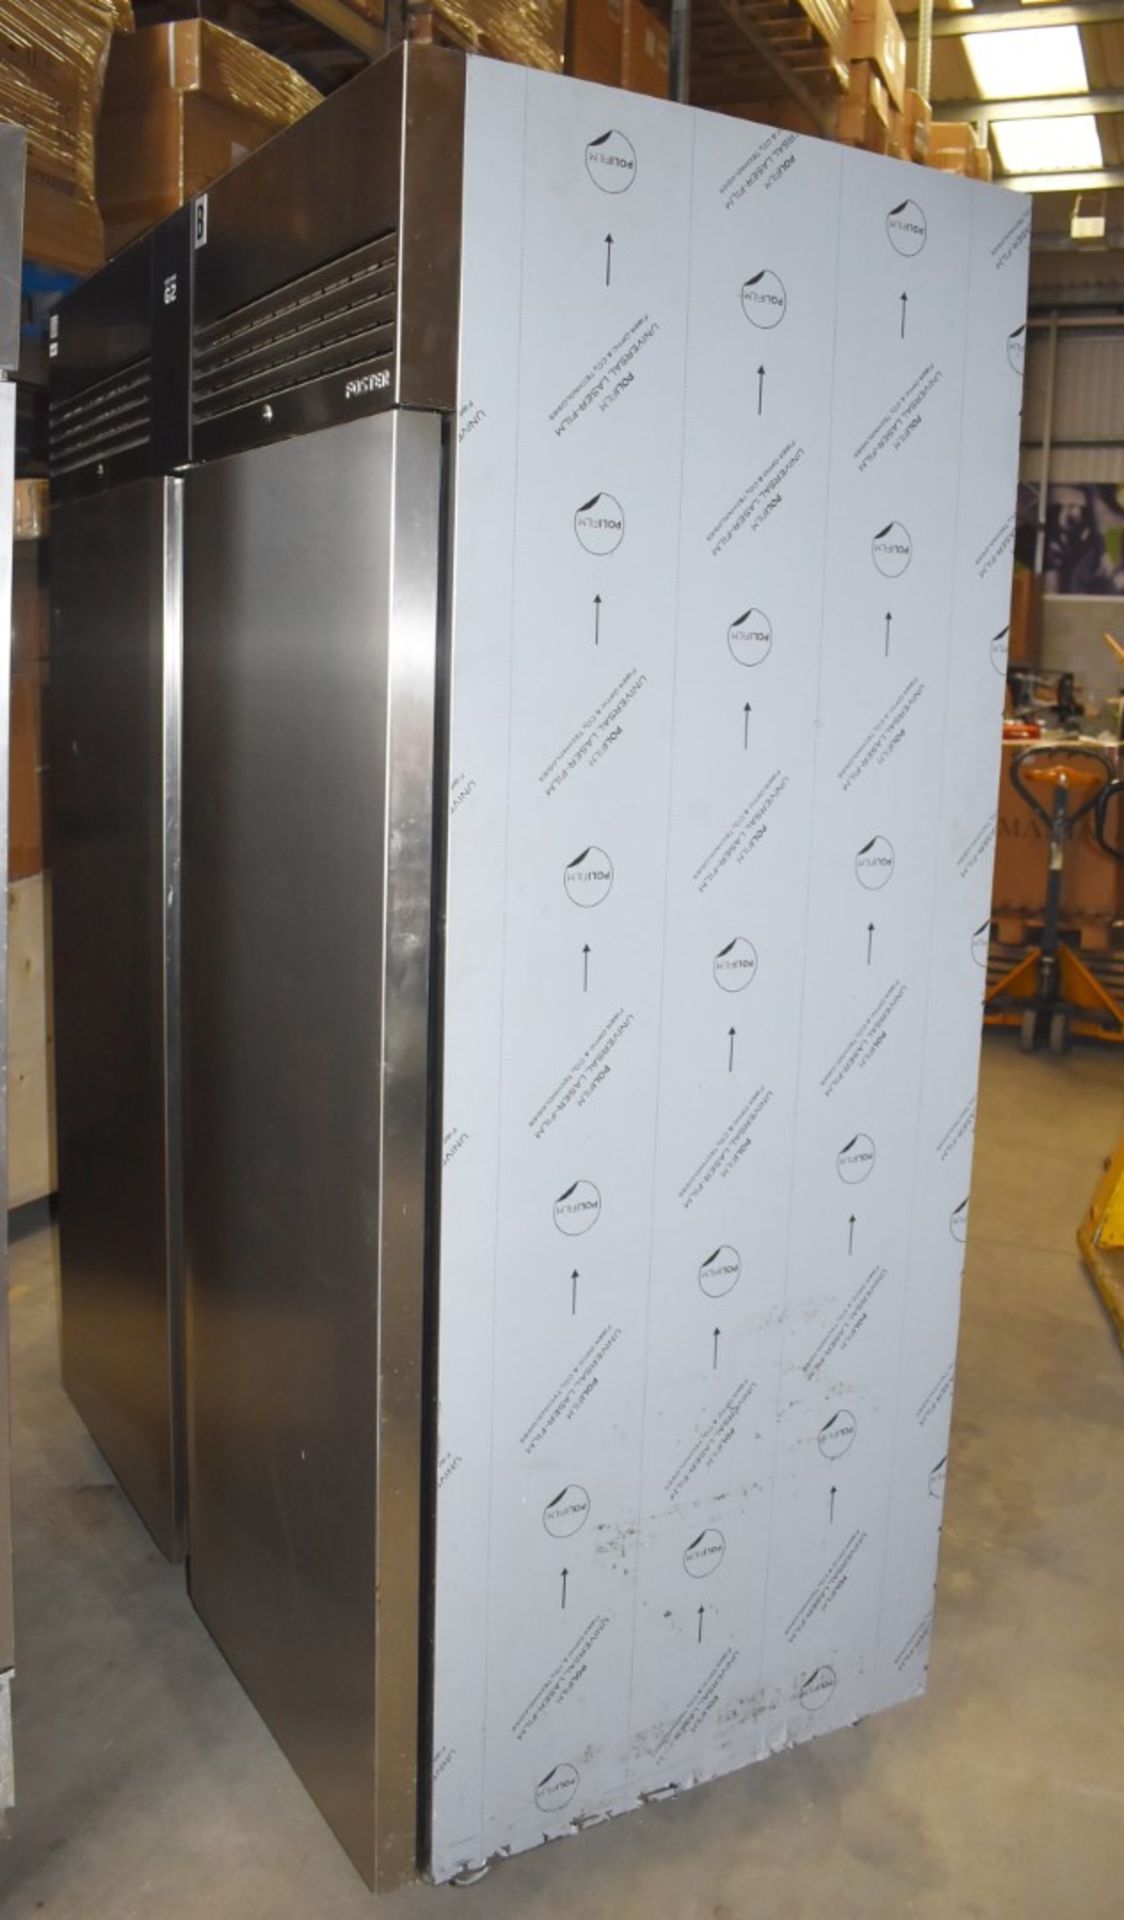 1 x Foster EcoPro G2 EP1440L Double Door Upright Meat Fridge With Stainless Steel Finish - Image 7 of 8